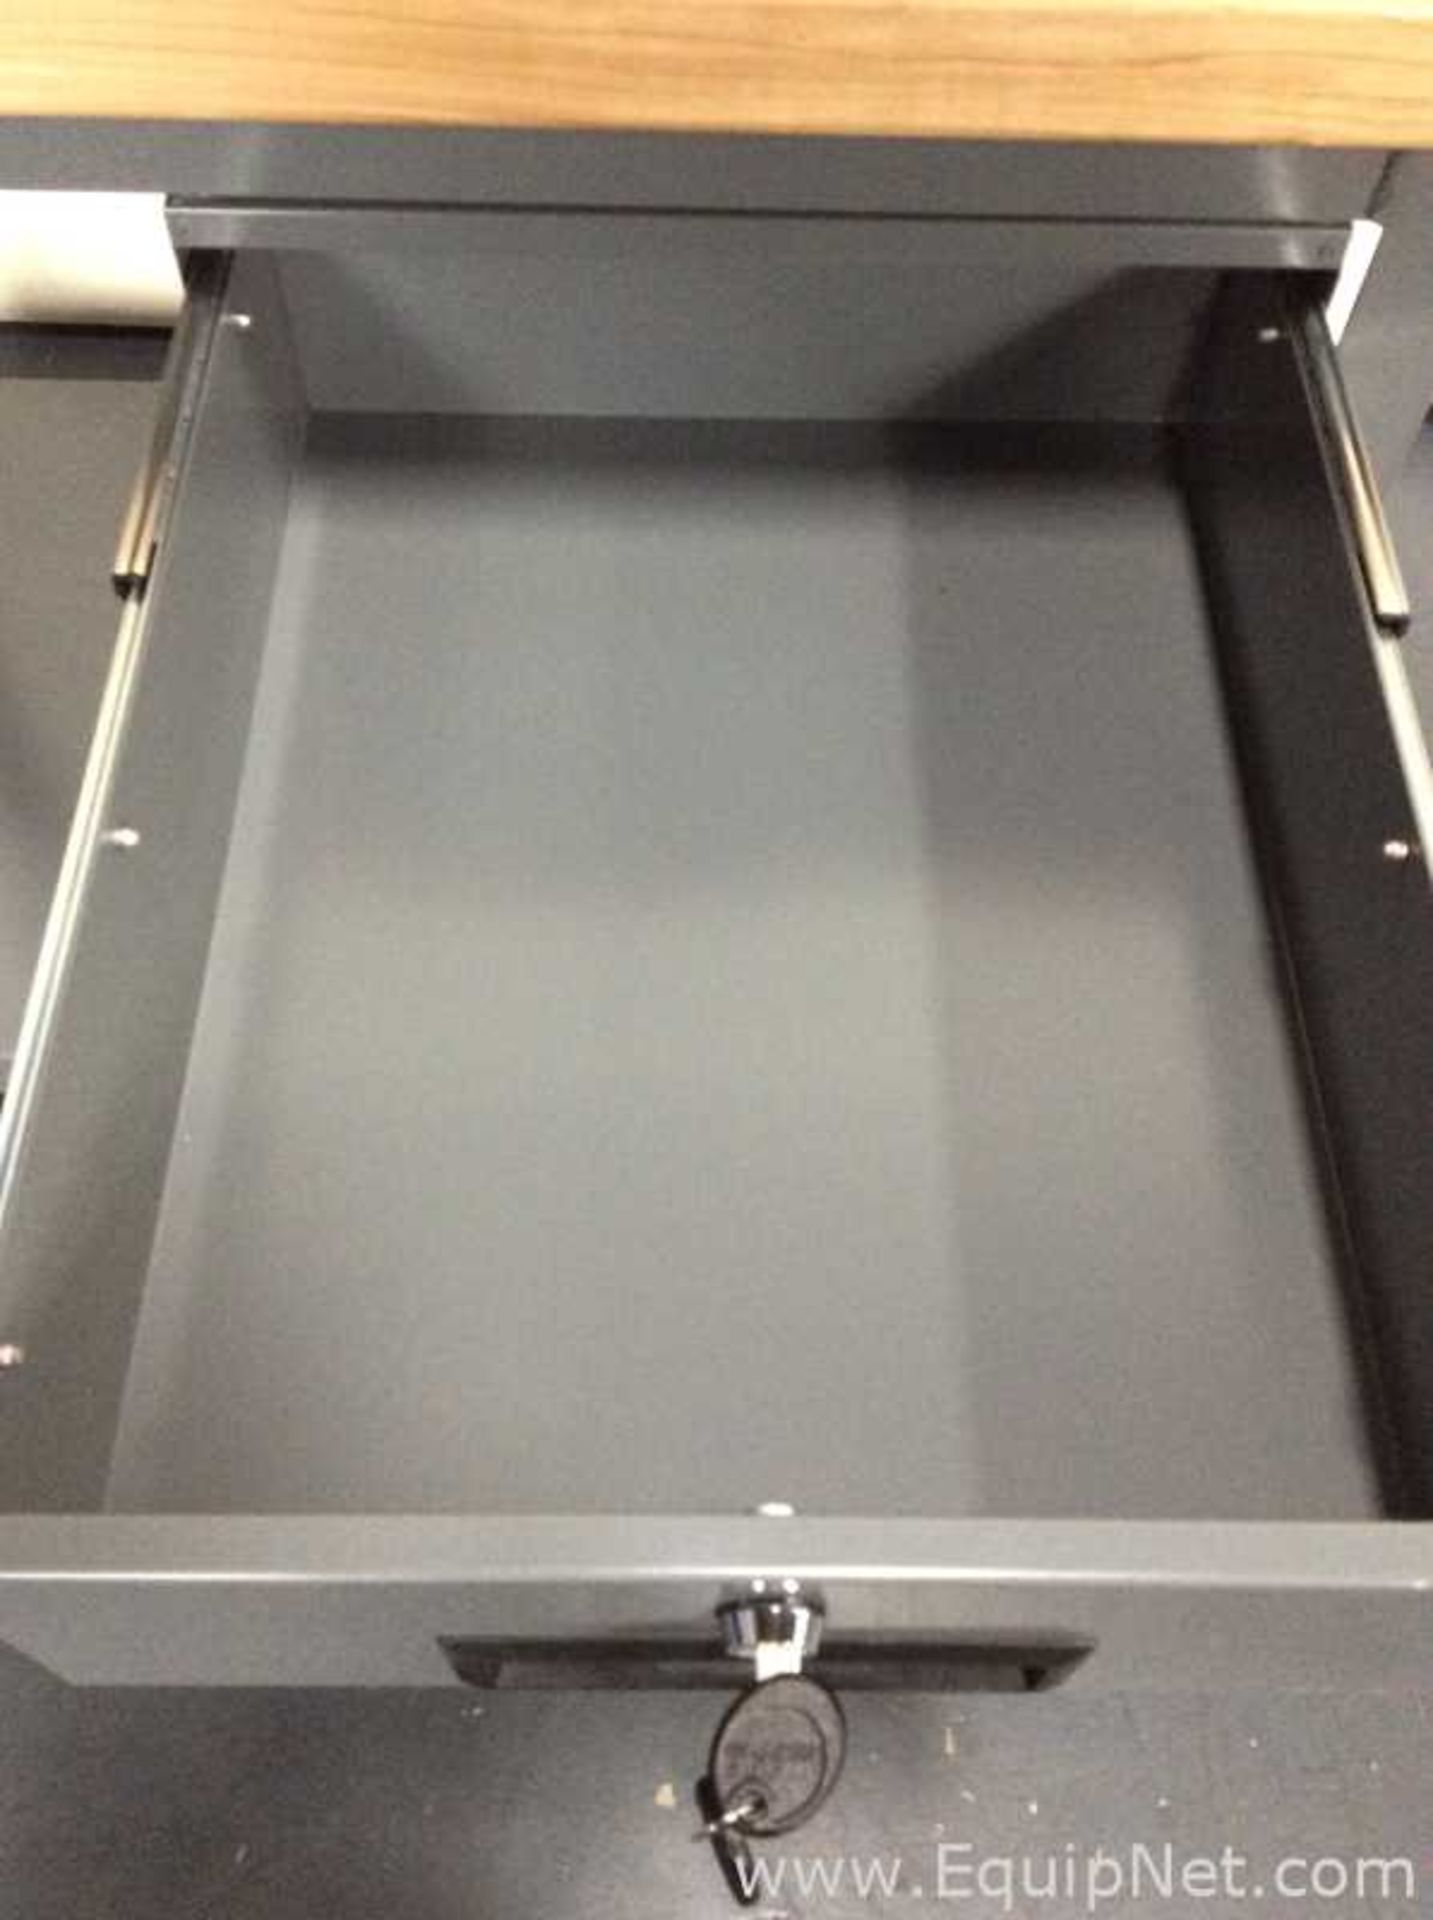 Allegis AC112 Table with Locking Drawer - Image 2 of 4